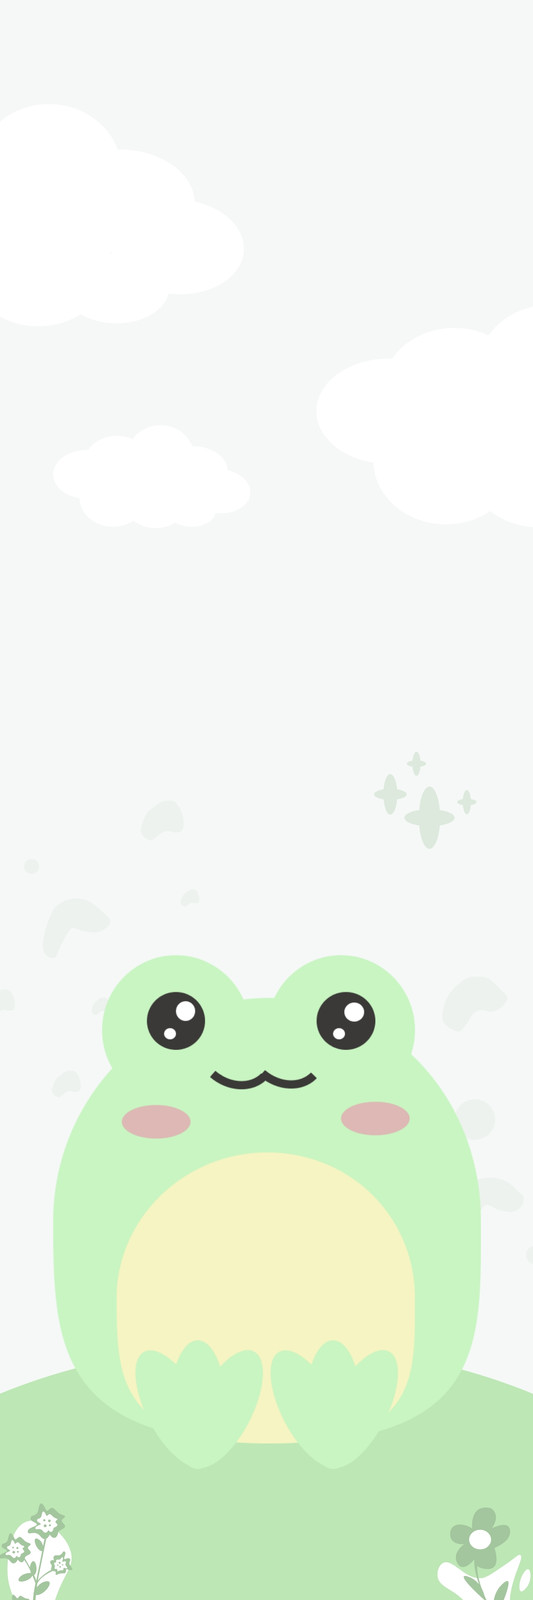 Page 4 - Free and customizable frog wallpaper templates